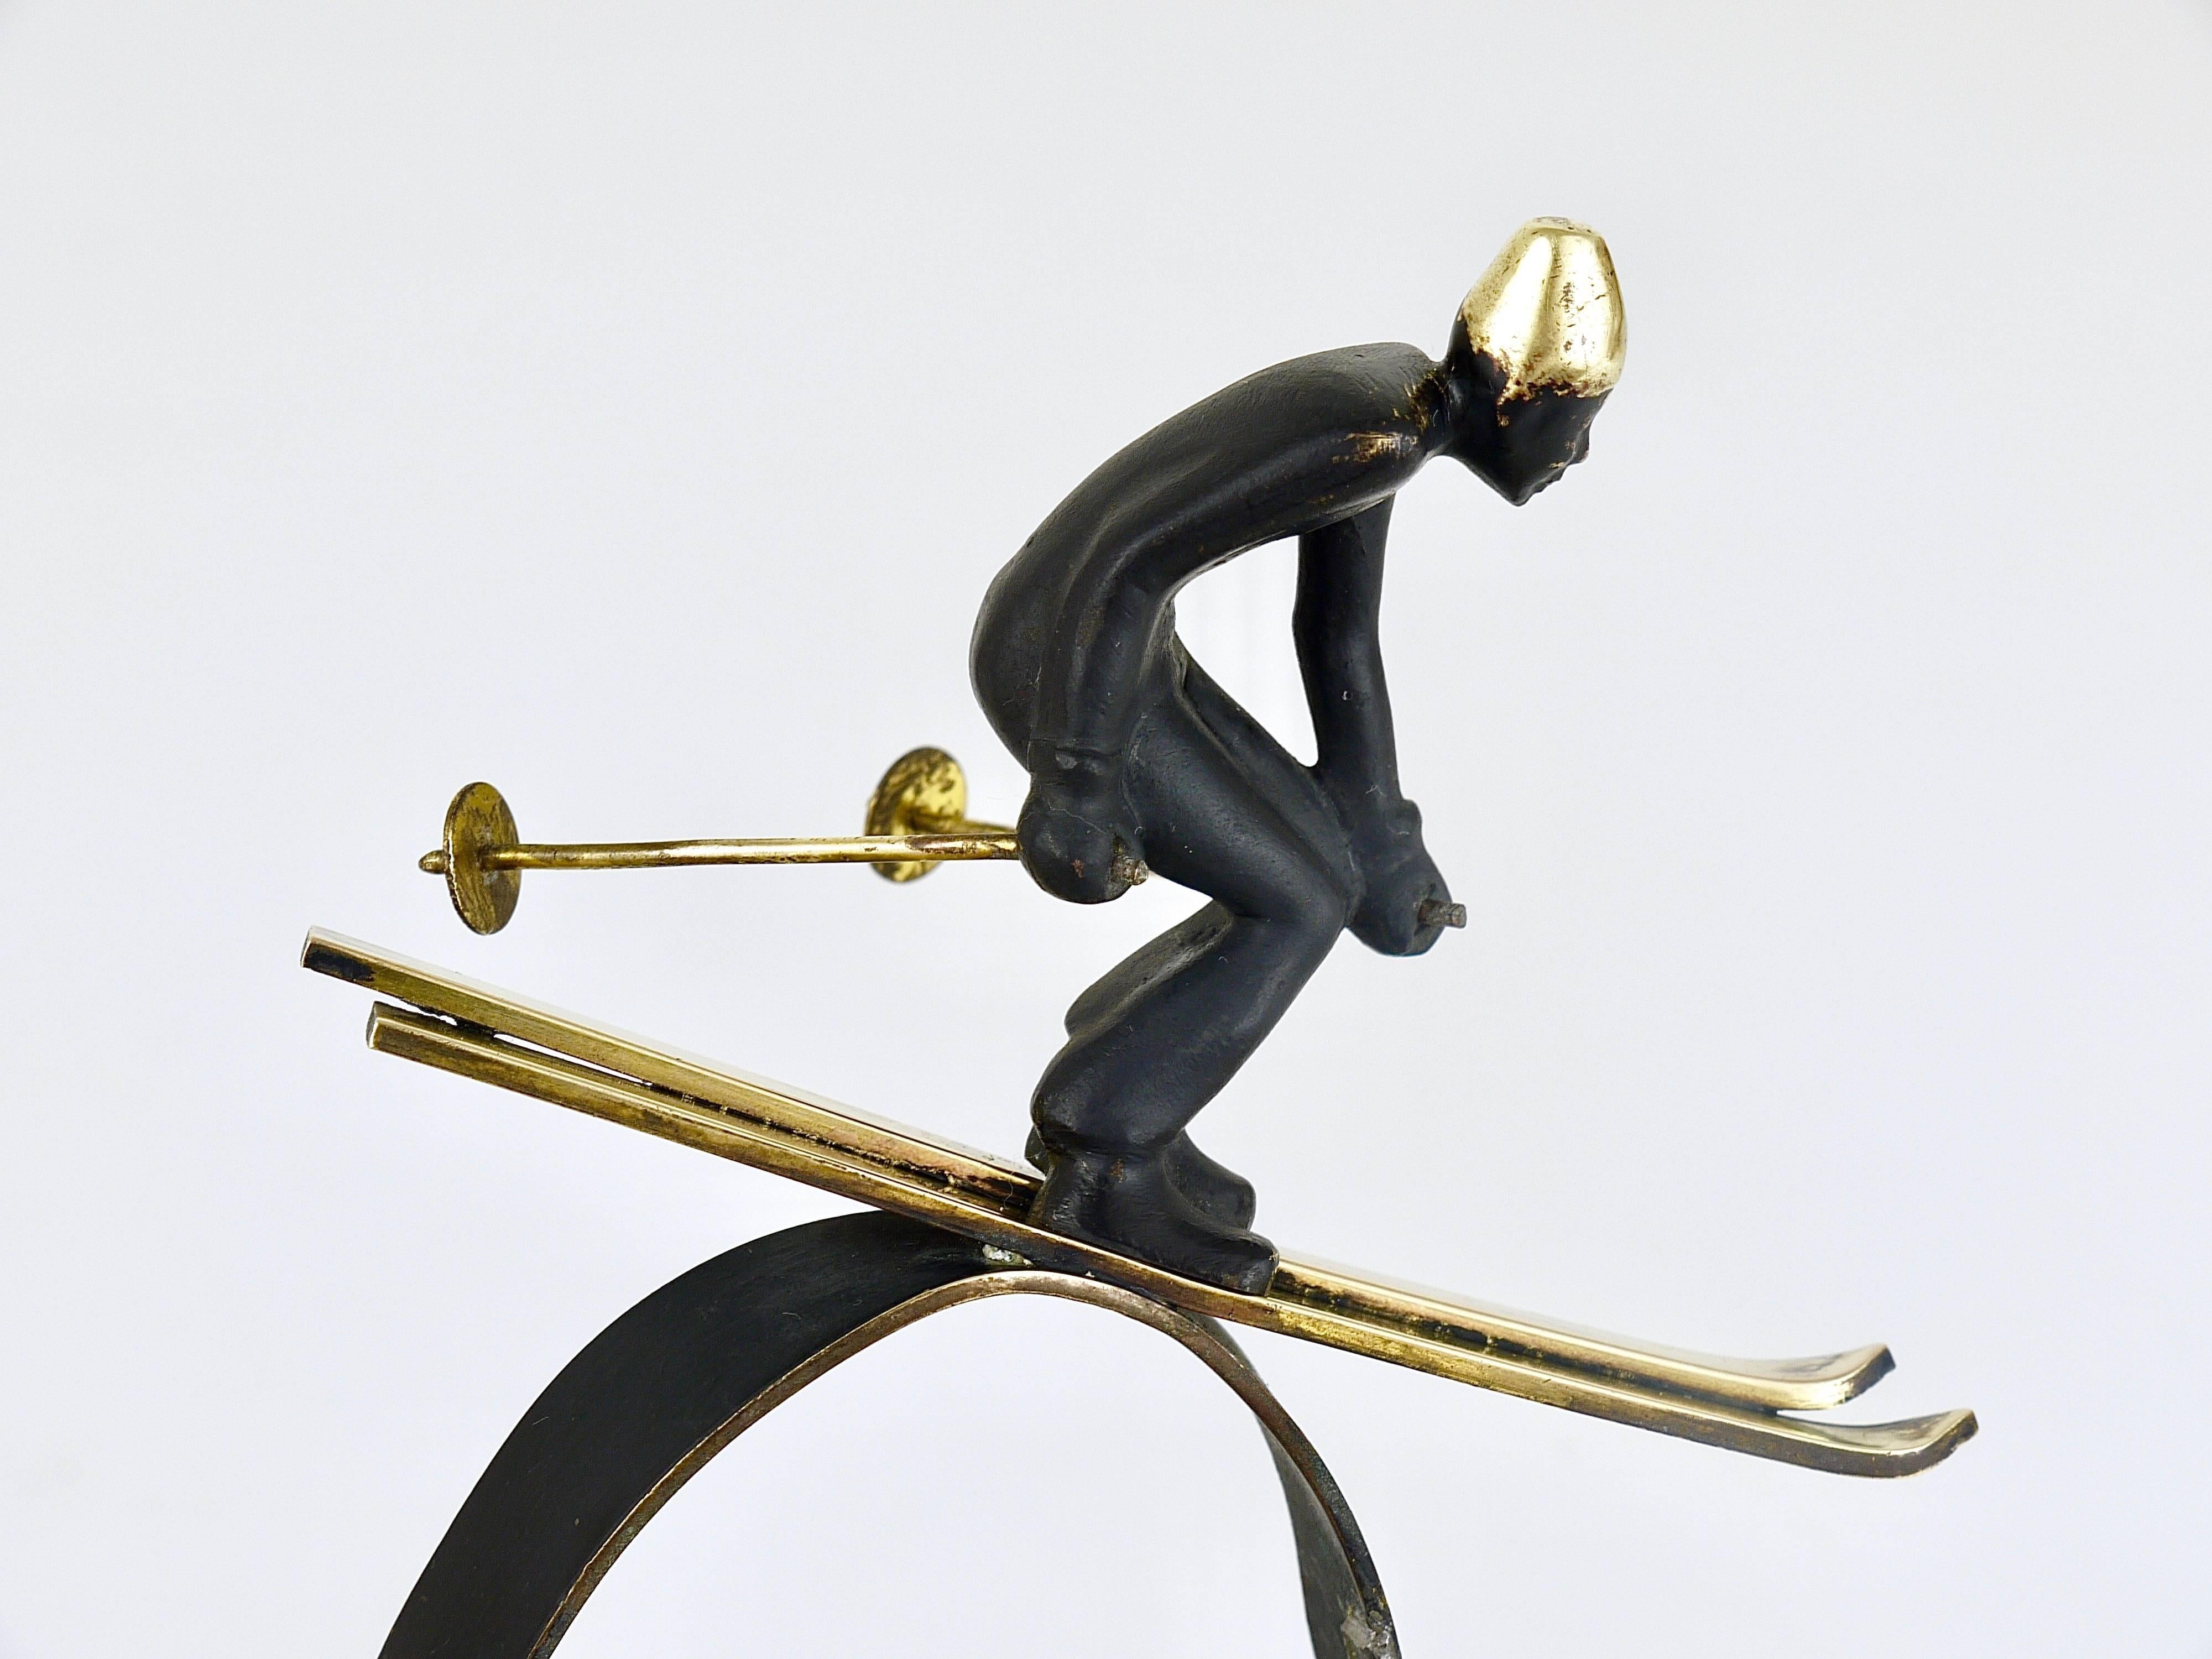 A decorative and rare Mid-Century brass sculpture, displaying a skier on a hill with trees from the 1950s. Designed by Walter Bosse, executed by Hertha Baller in Austria. In good condition with charming patina. We offer other Walter Bosse brass